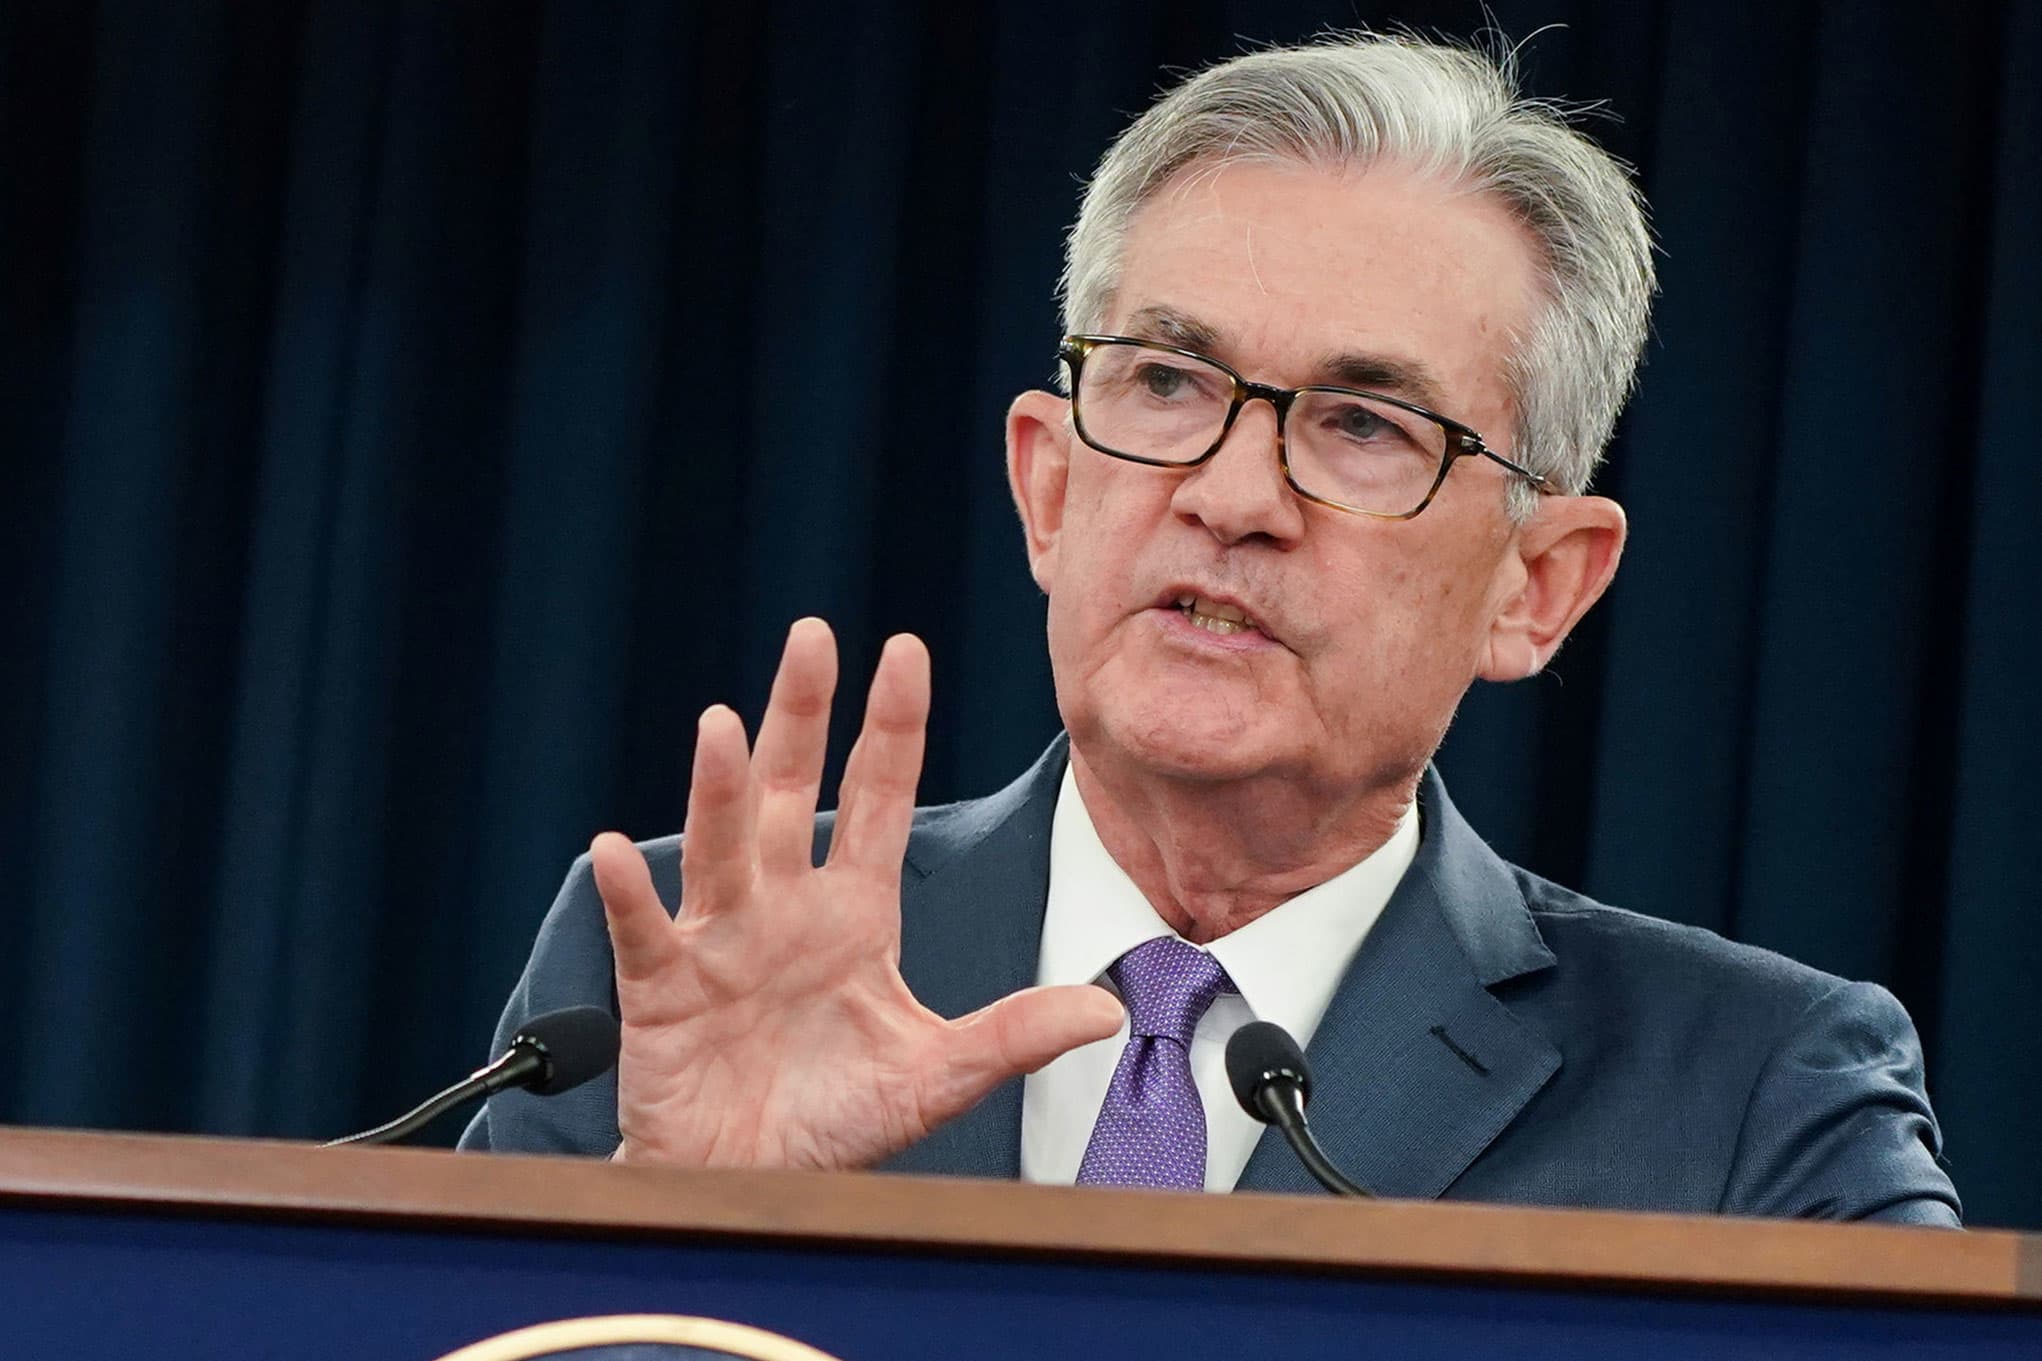 Cryptocurrencies are not useful deposits of value, says Fed Powell